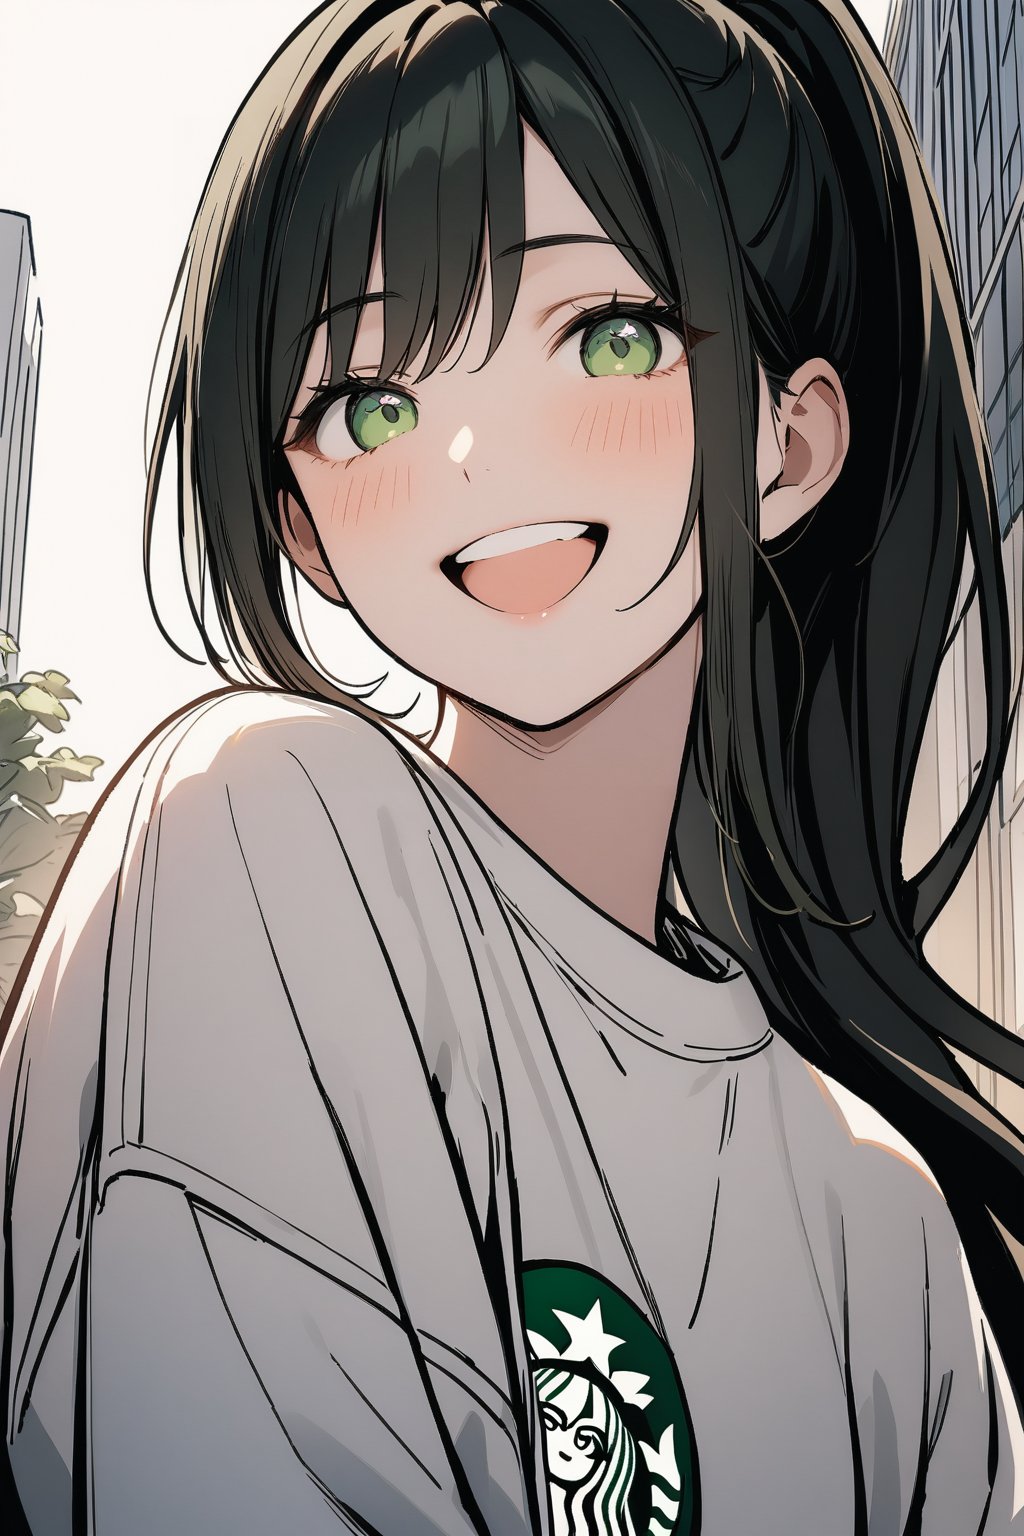 1girl, solo_female, long hair, black hair, ponytail, masterpiece, white sweatshirt, deep green eyes, smiling, happy, laughing, looking_at_the_viewer, wearing white denim shorts, portrait, tall girl, simple_background, outdoors in a city, starbucks, bright lighting, dramatic lighting, beautiful, lineart,txznf, standing